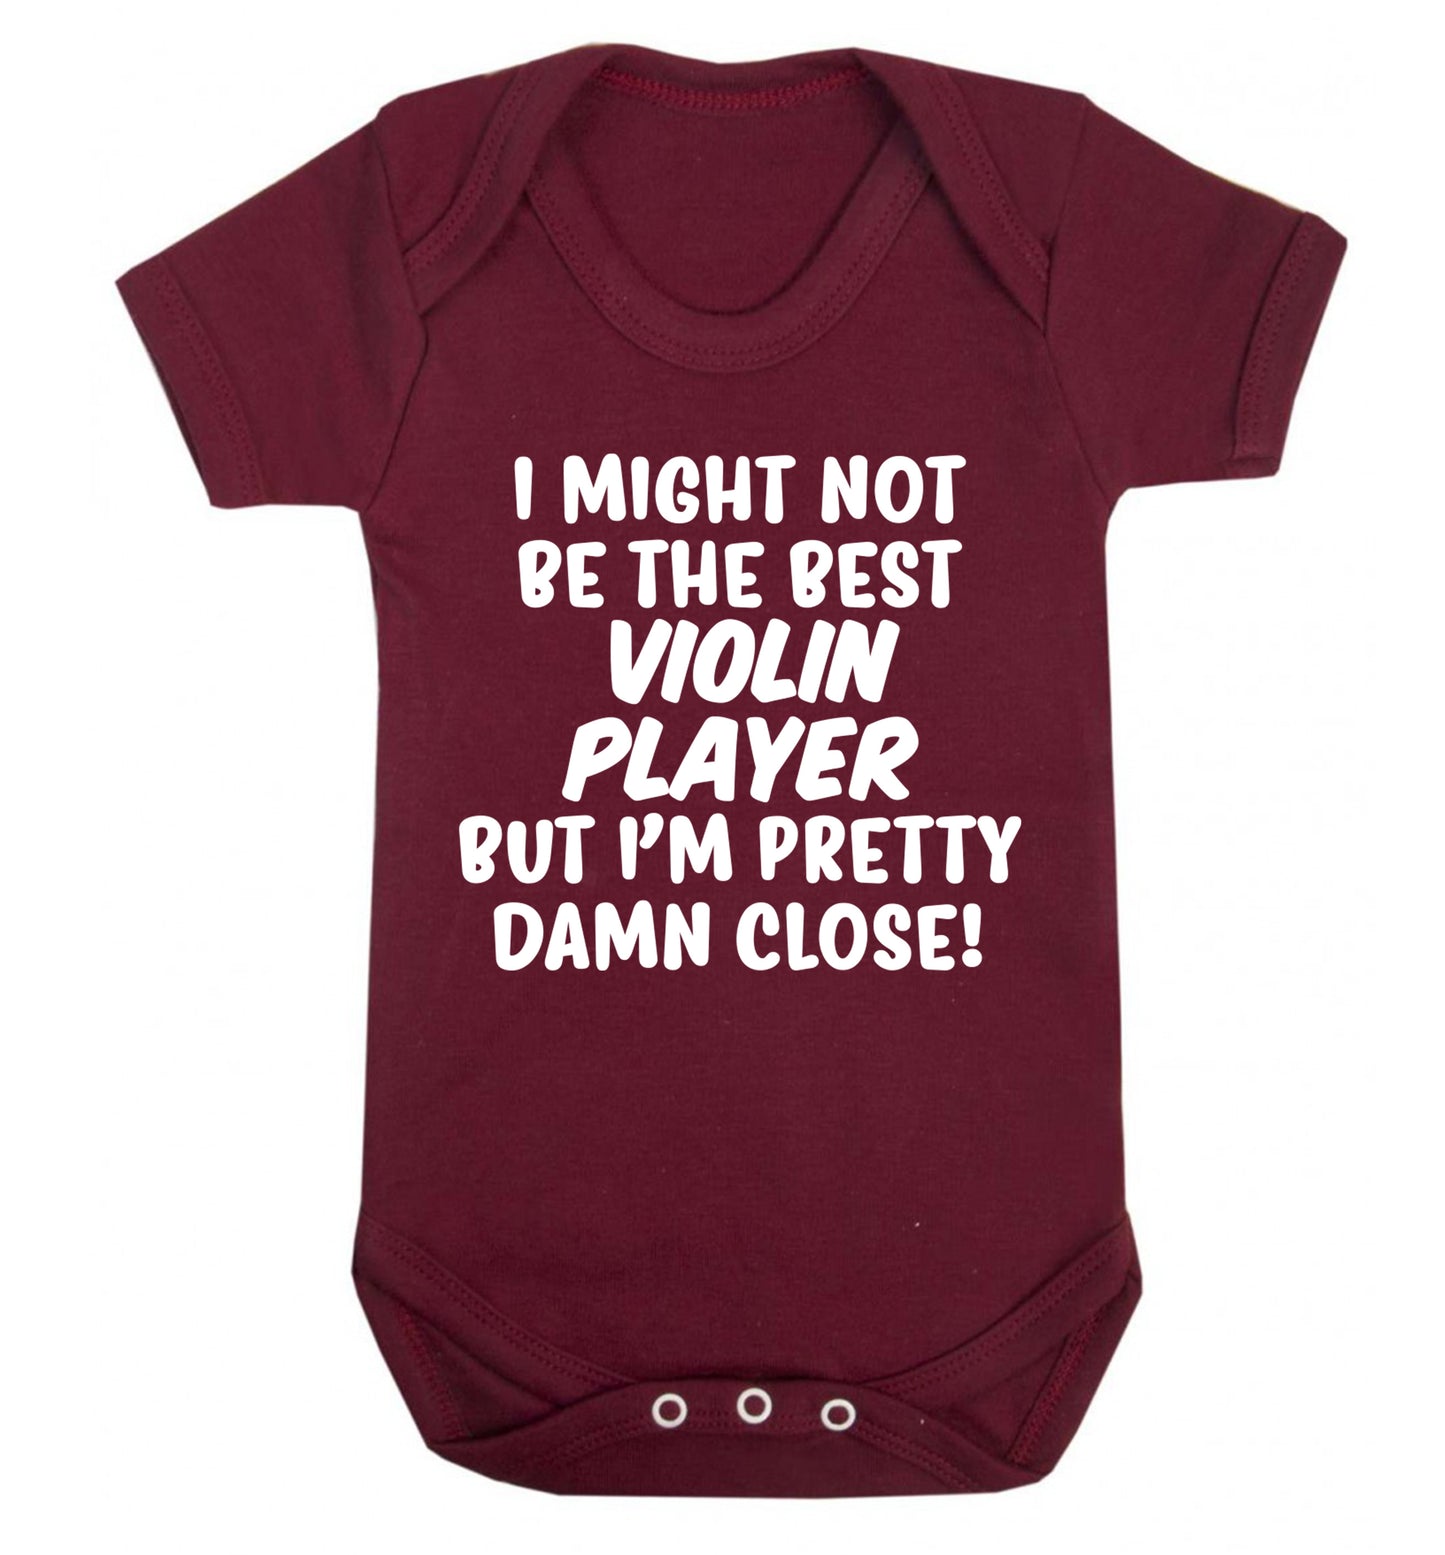 I might not be the best violin player but I'm pretty close Baby Vest maroon 18-24 months